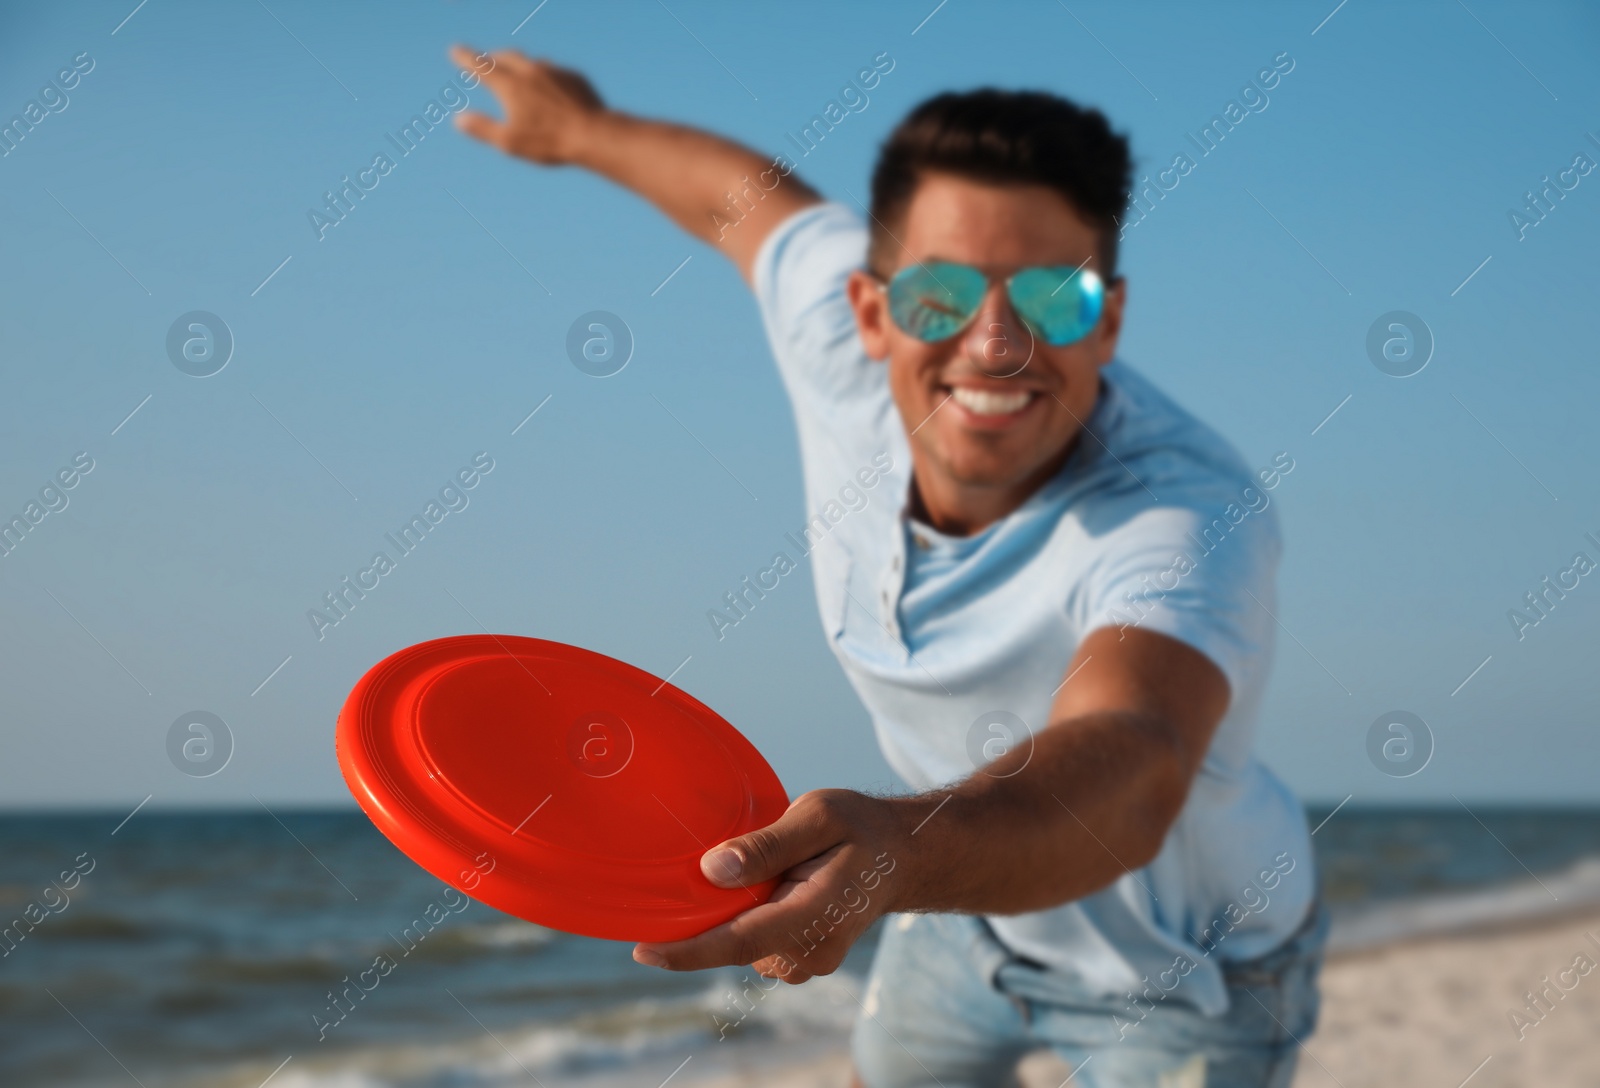 Photo of Happy man throwing flying disk at beach, focus on hand